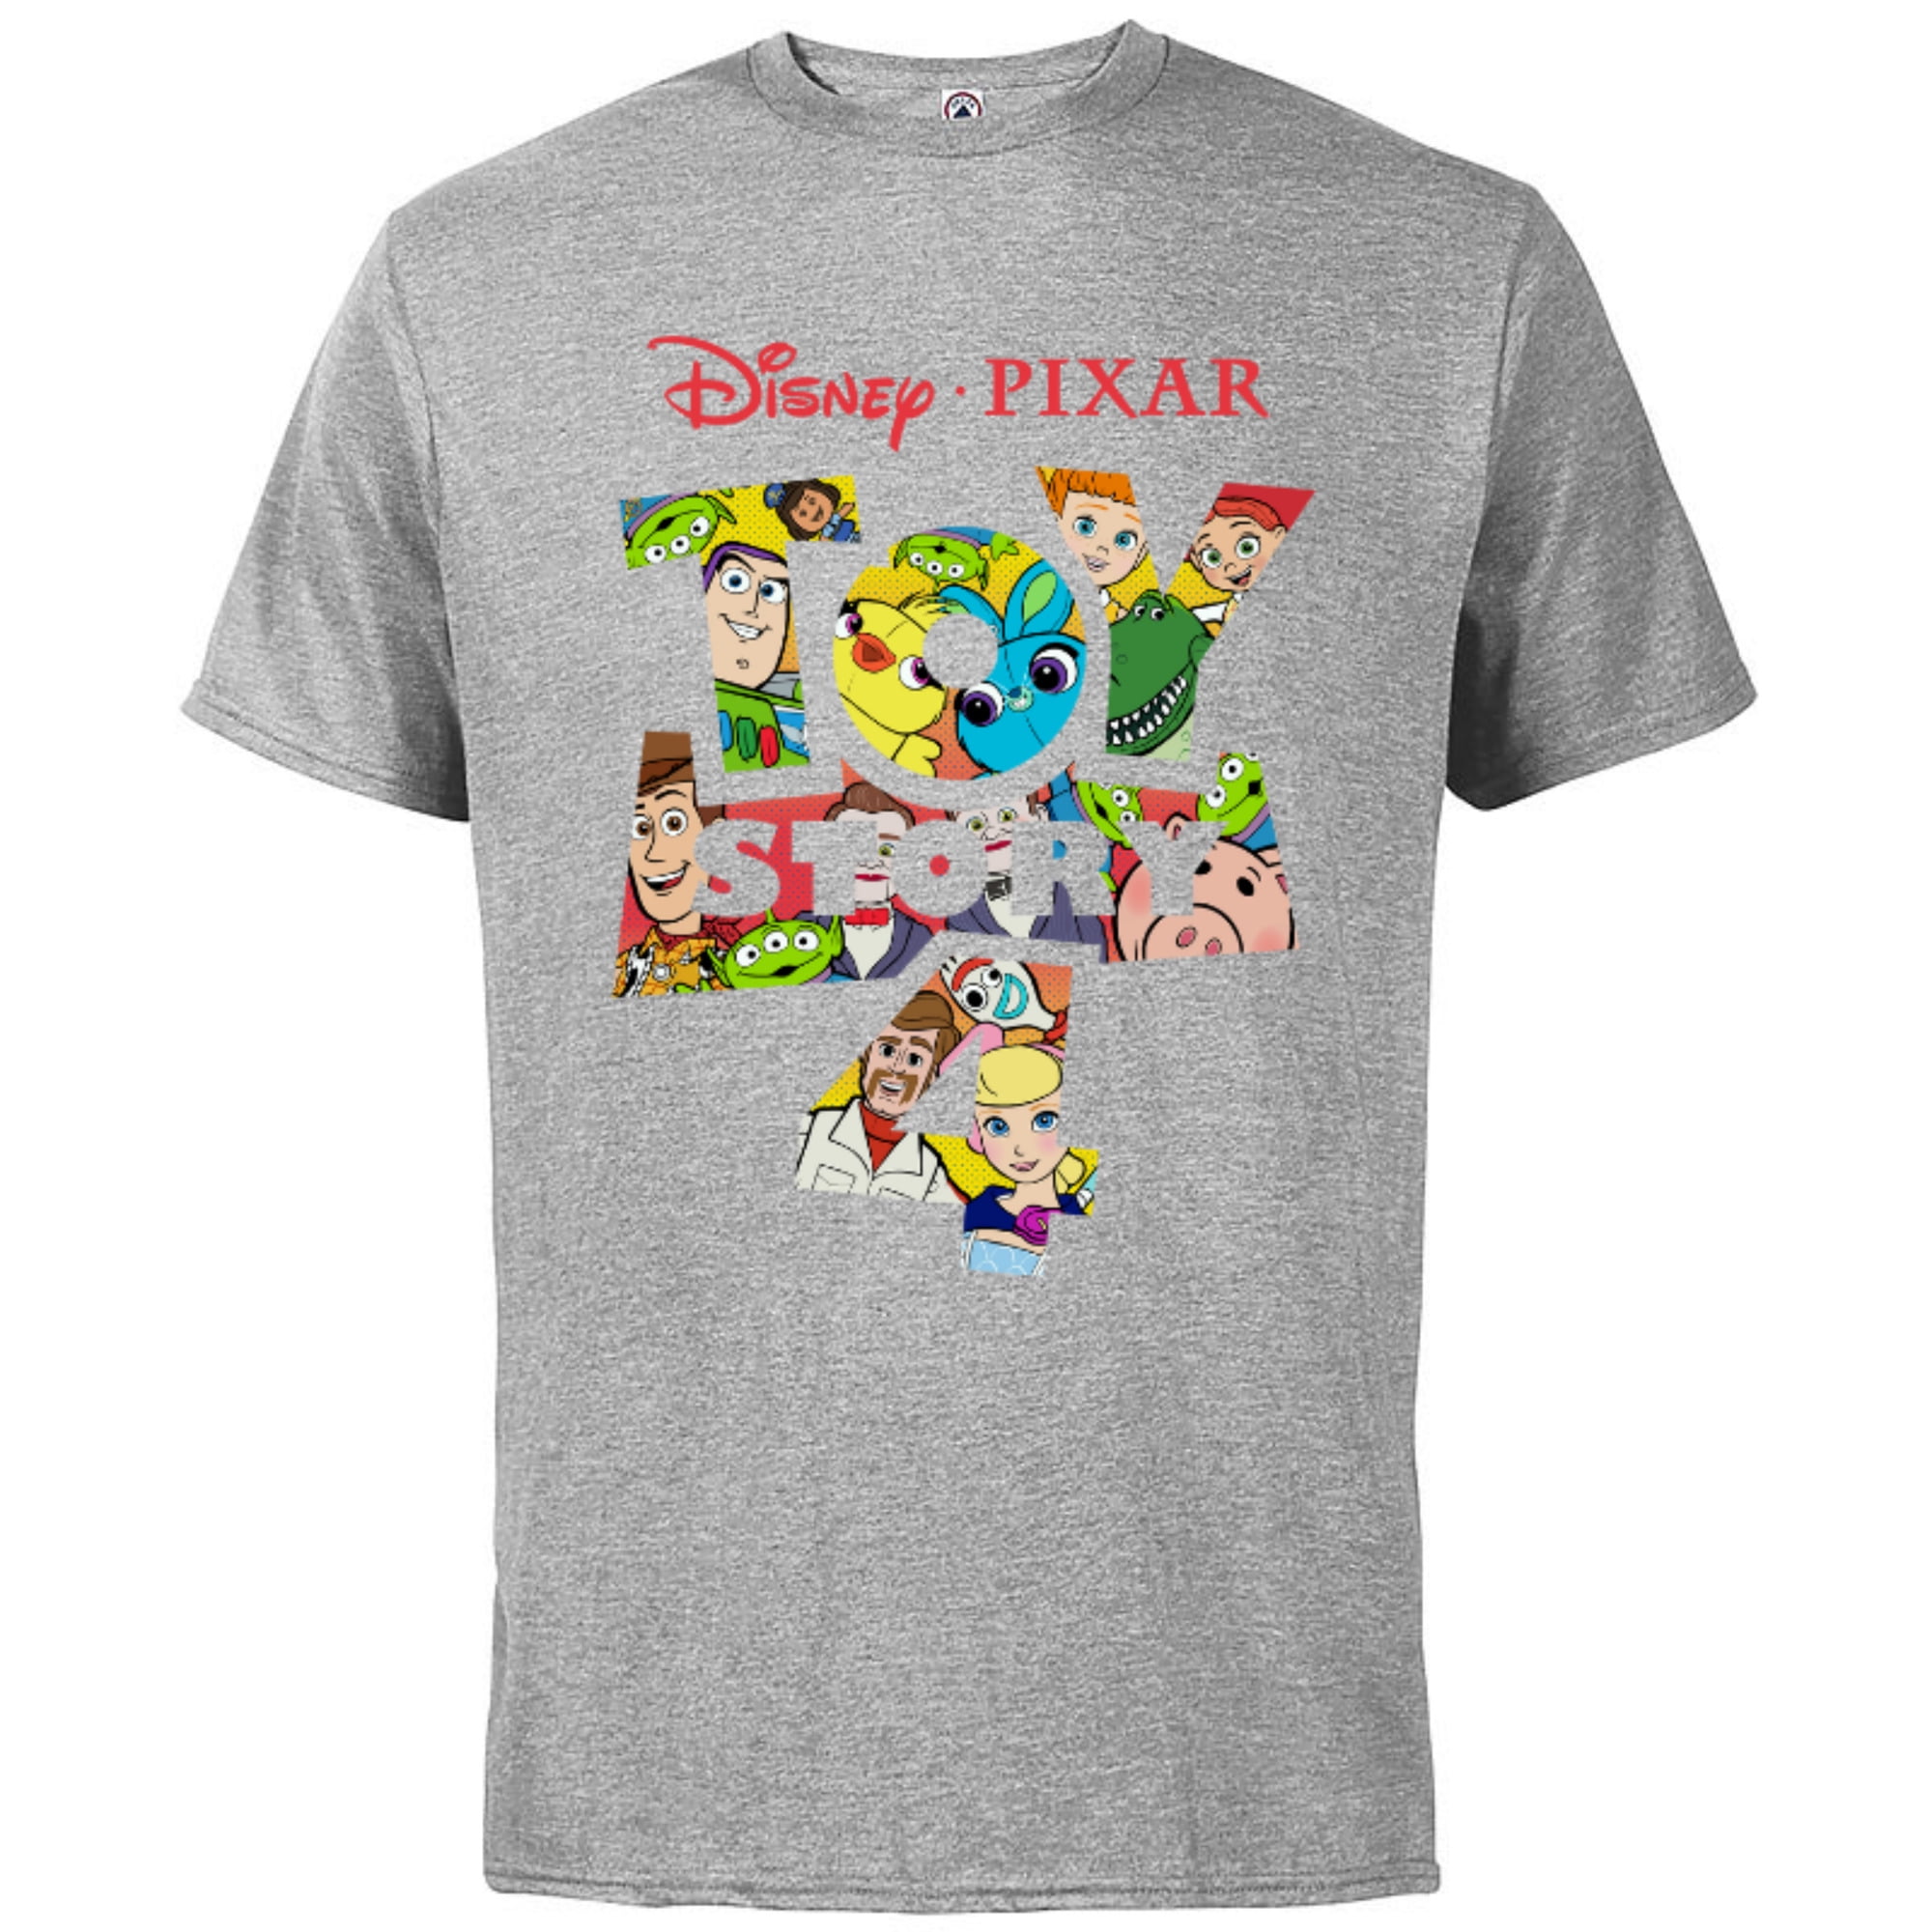 Disney Pixar Toy Story 4 Logo and Characters T-Shirt - Short Sleeve Cotton T -Shirt for Adults - Customized-White